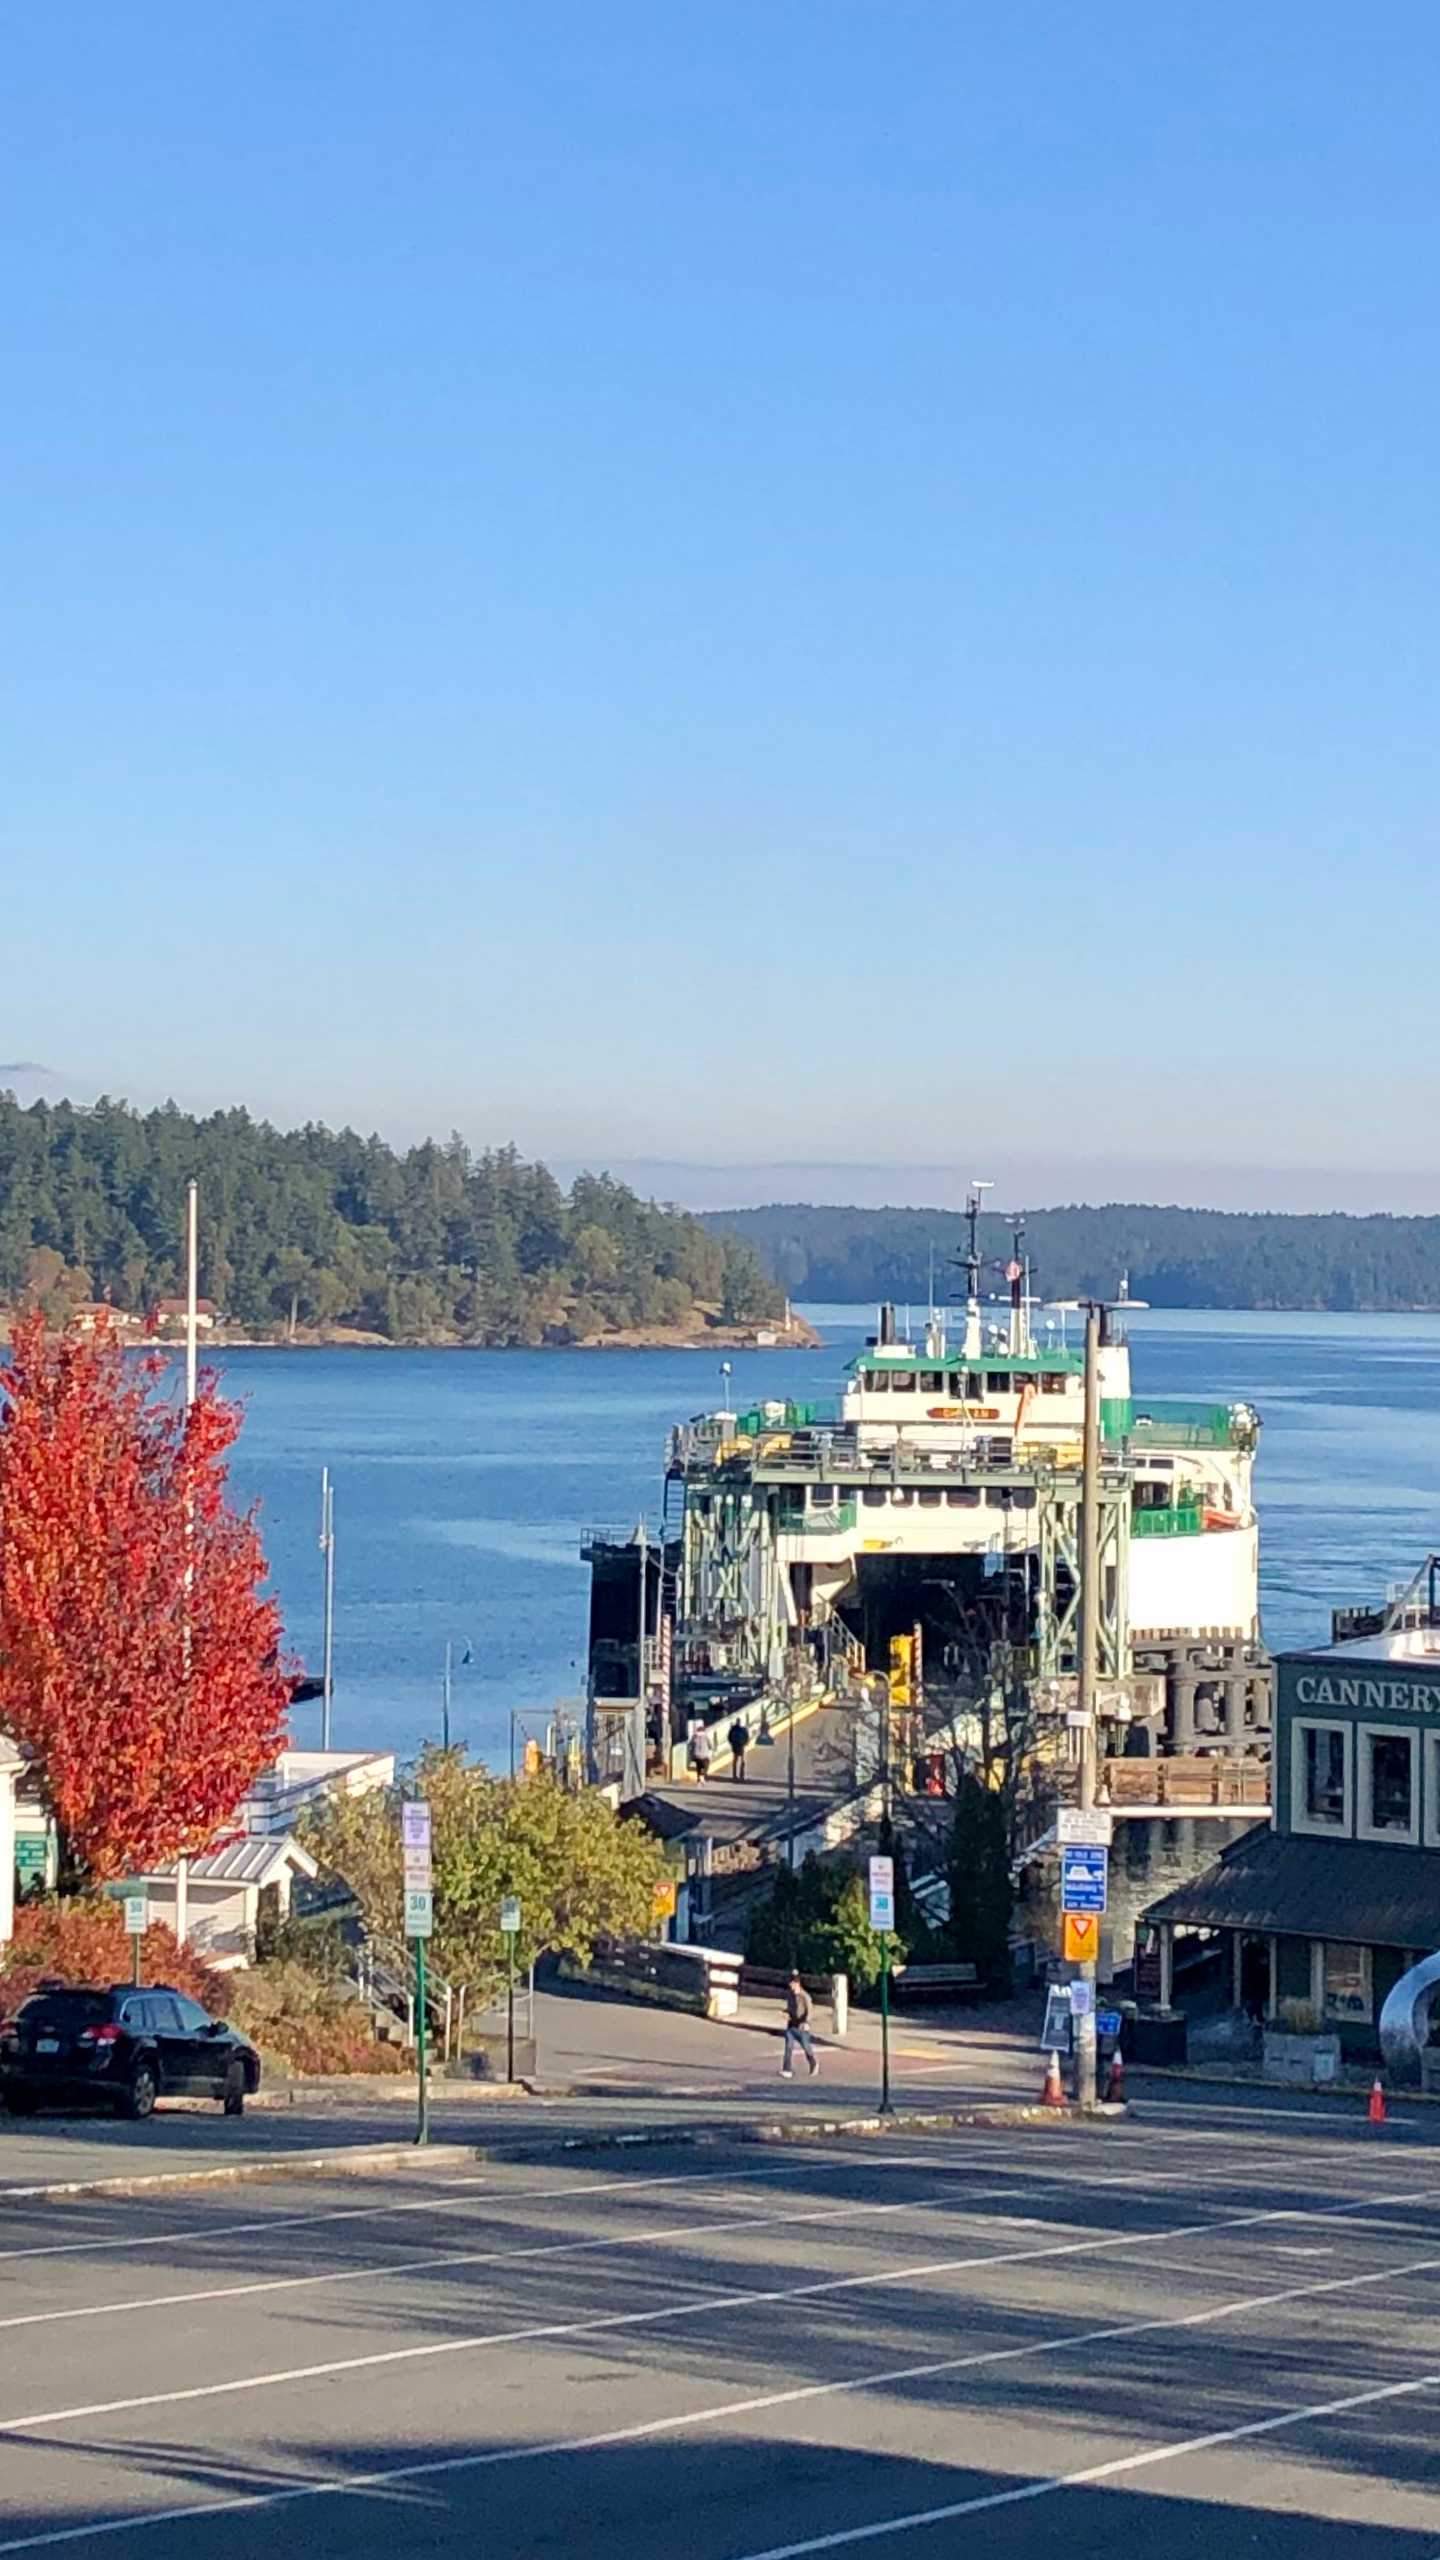 ⛴ An iconic look- love seeing the ferry pull away. Thankfully we haven’t had to deal with missing a ferry (knock on wood 🪵)!

#pov #sanjuanisland #washingtonstateferries #justanotherdayinwa